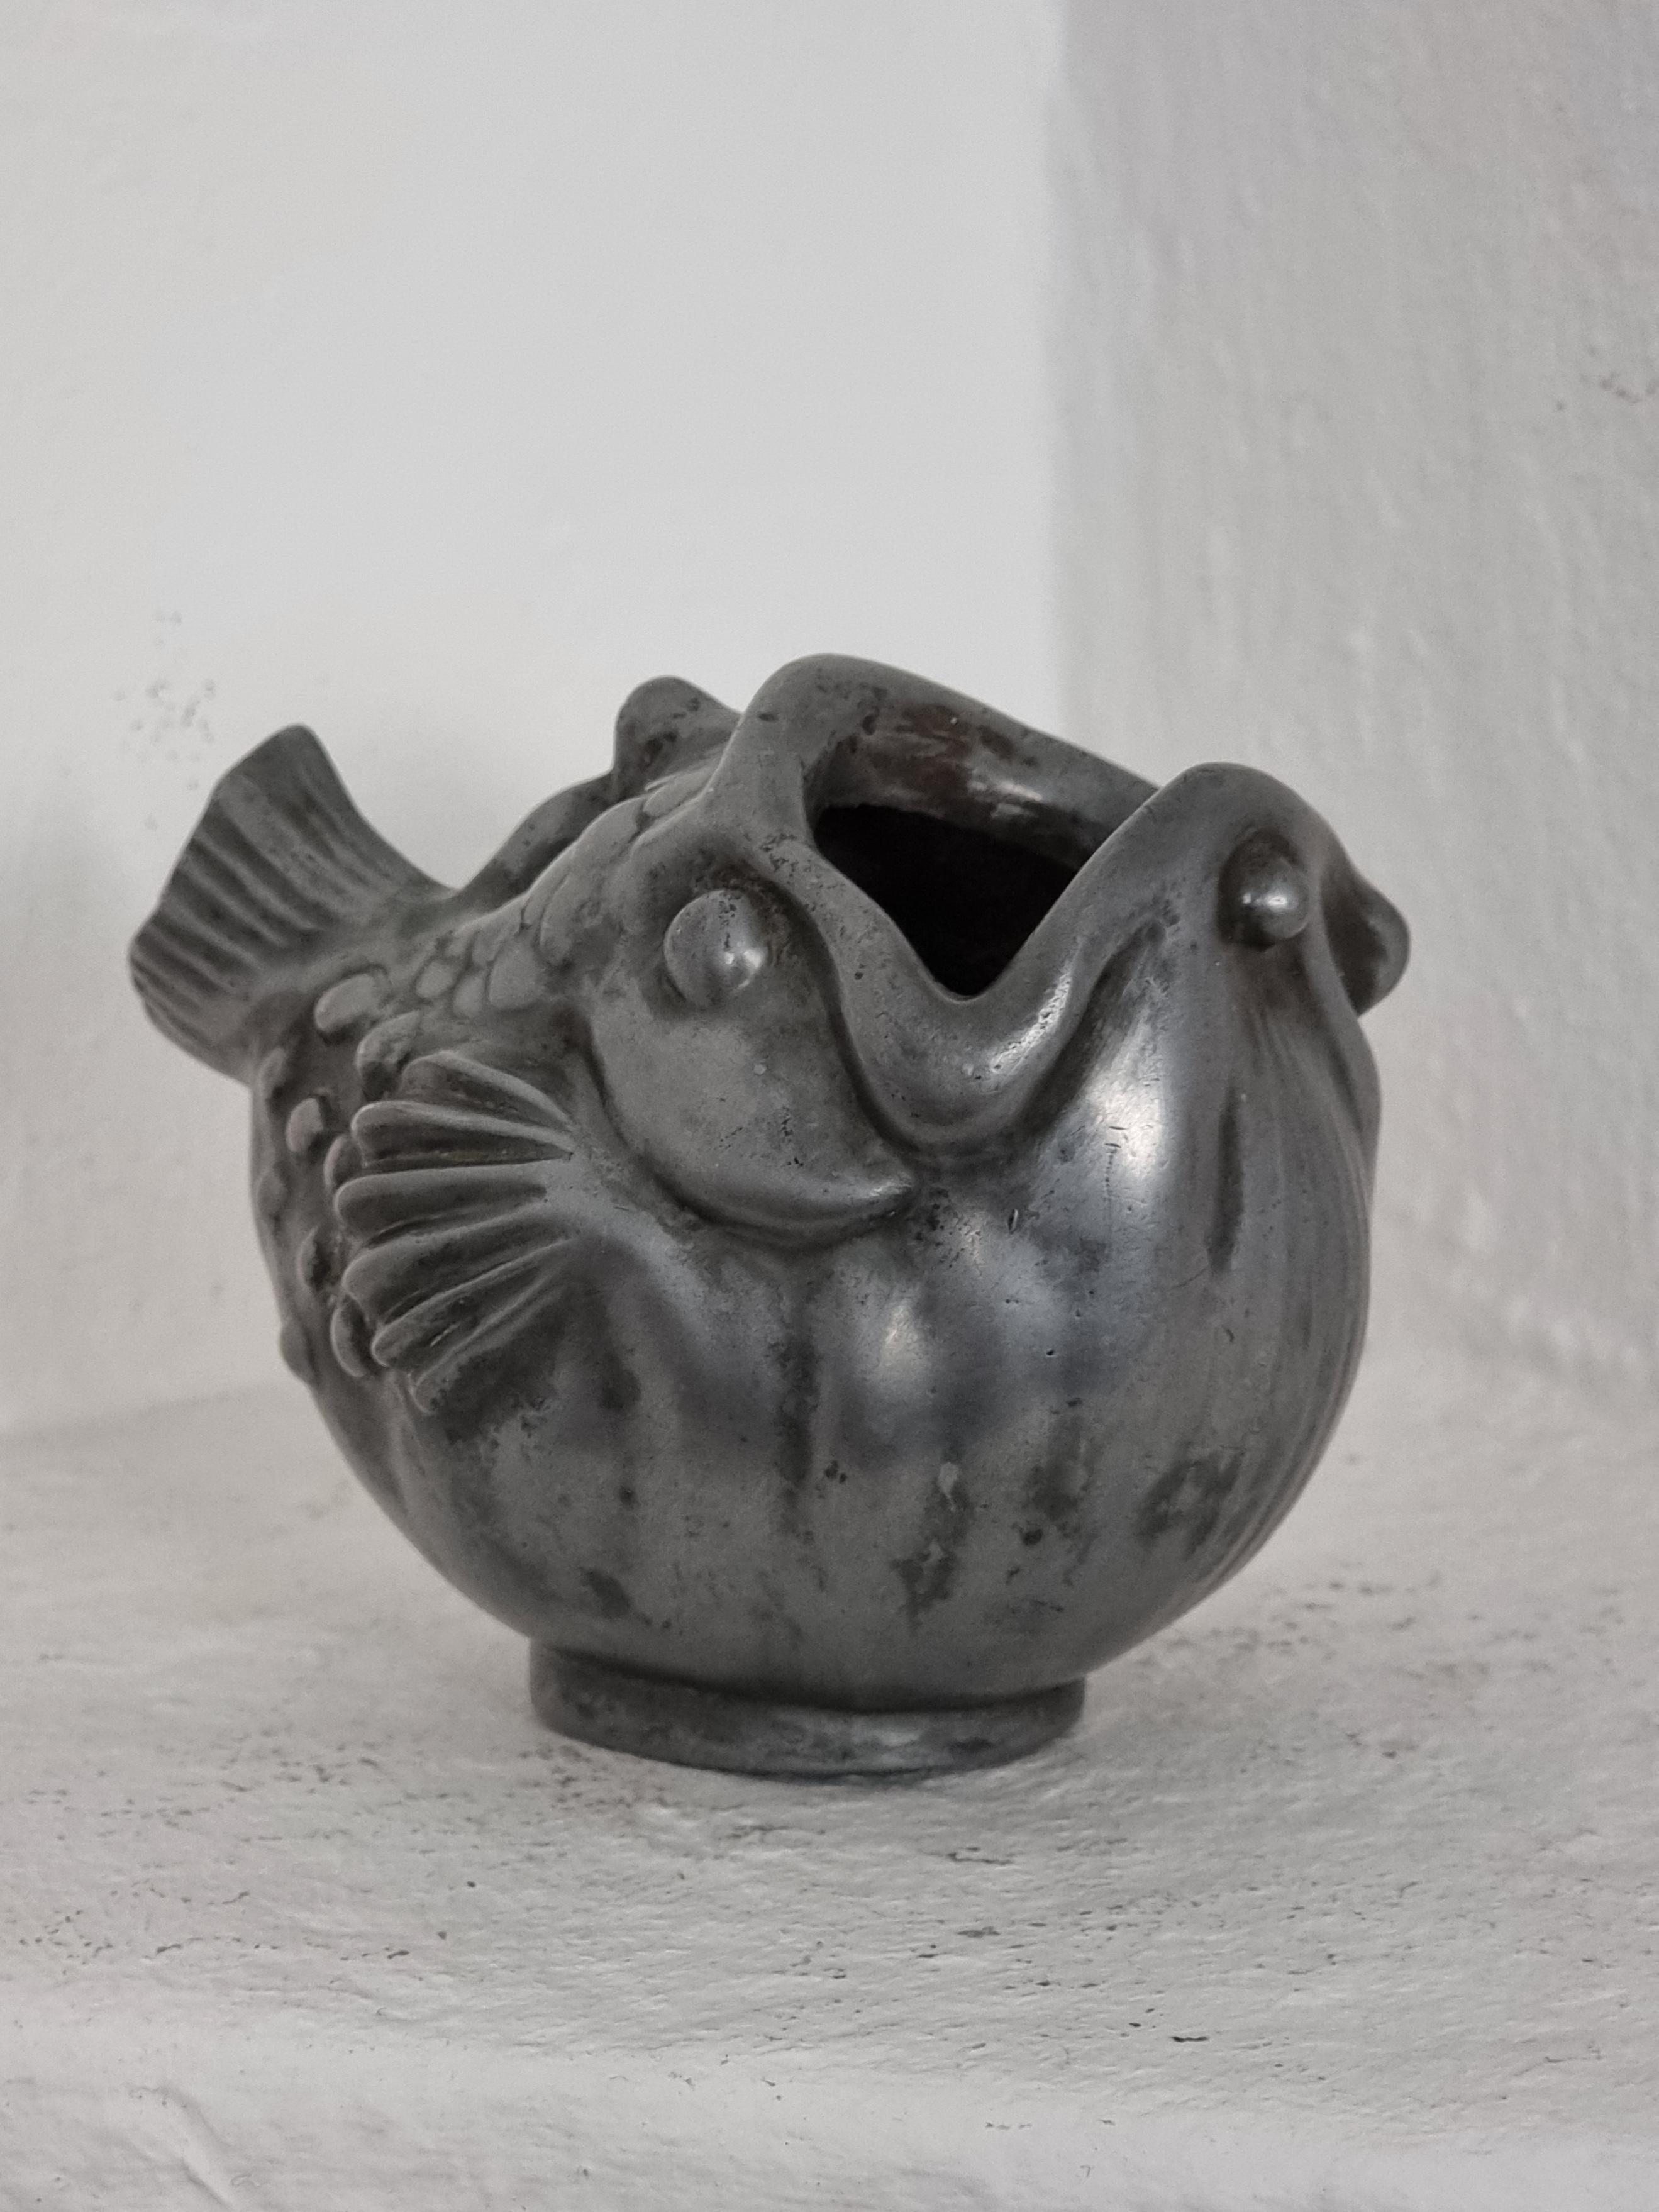 Rare, decorative vase in pewter, depicting fish. Made by Just Andersen, Denmark 1930s. 

In good condition, bottom with smaller scratches.  Normal signs of age and wear.